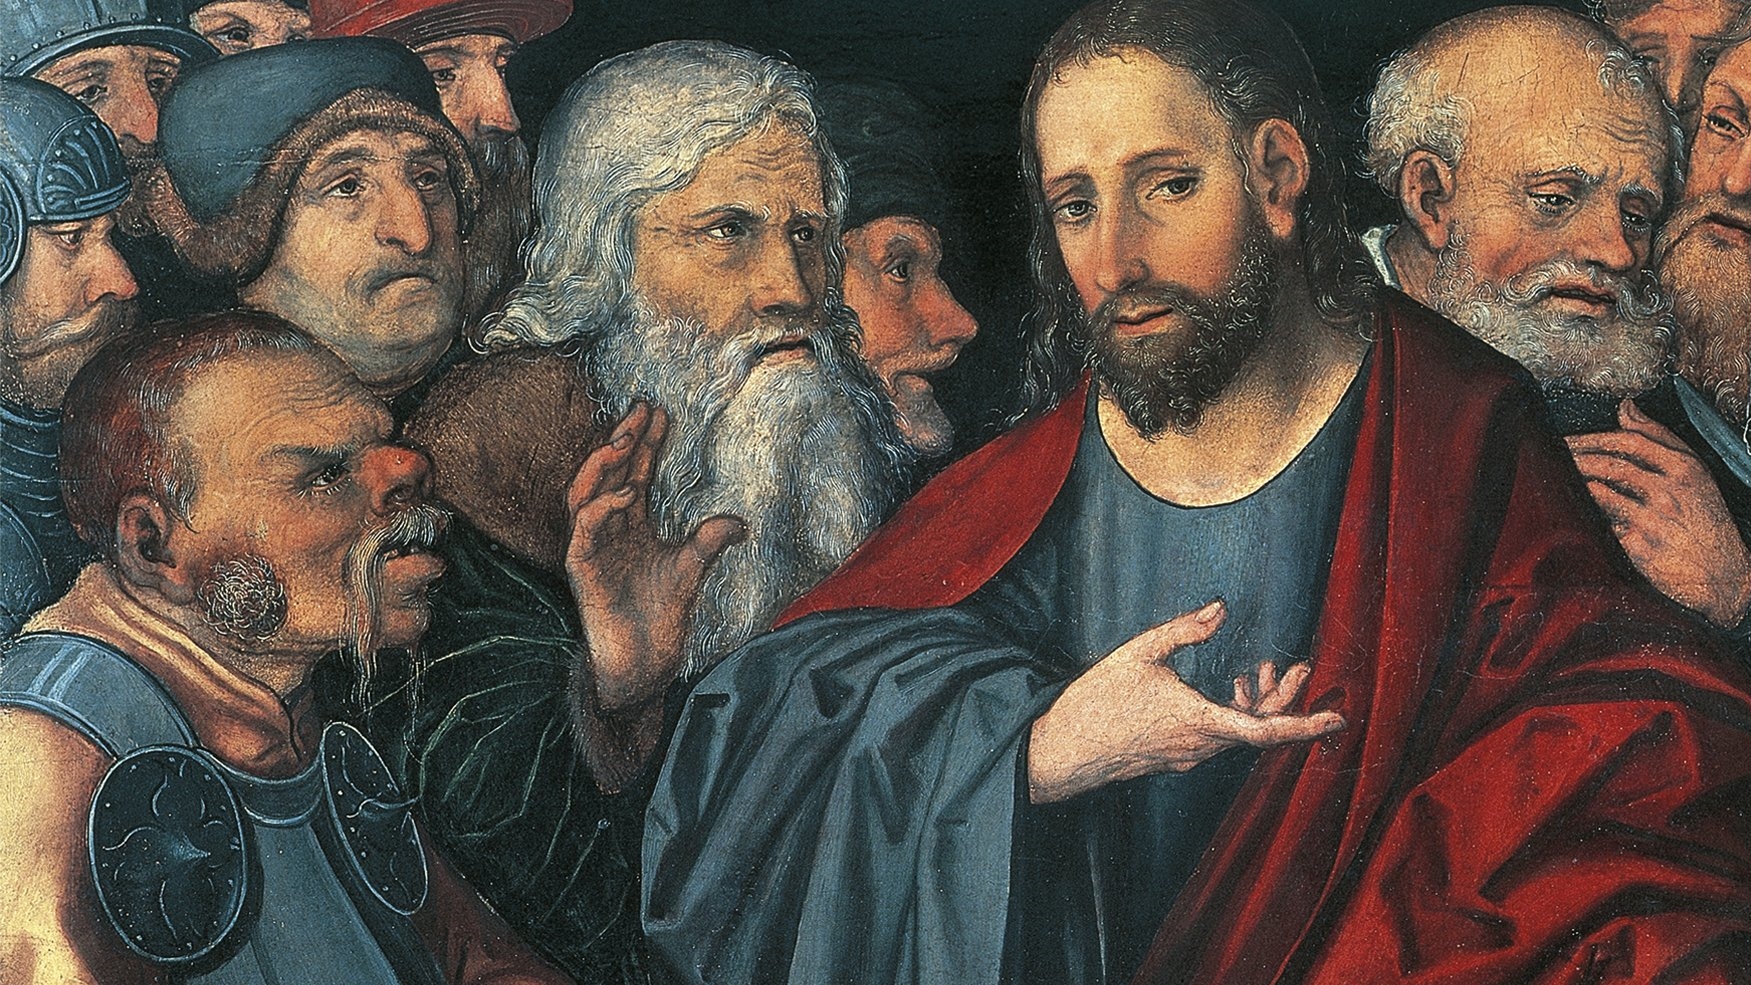 The 5th & 6th Verbal Exchanges: Jesus Becomes a Scandal (John 6.47-59)